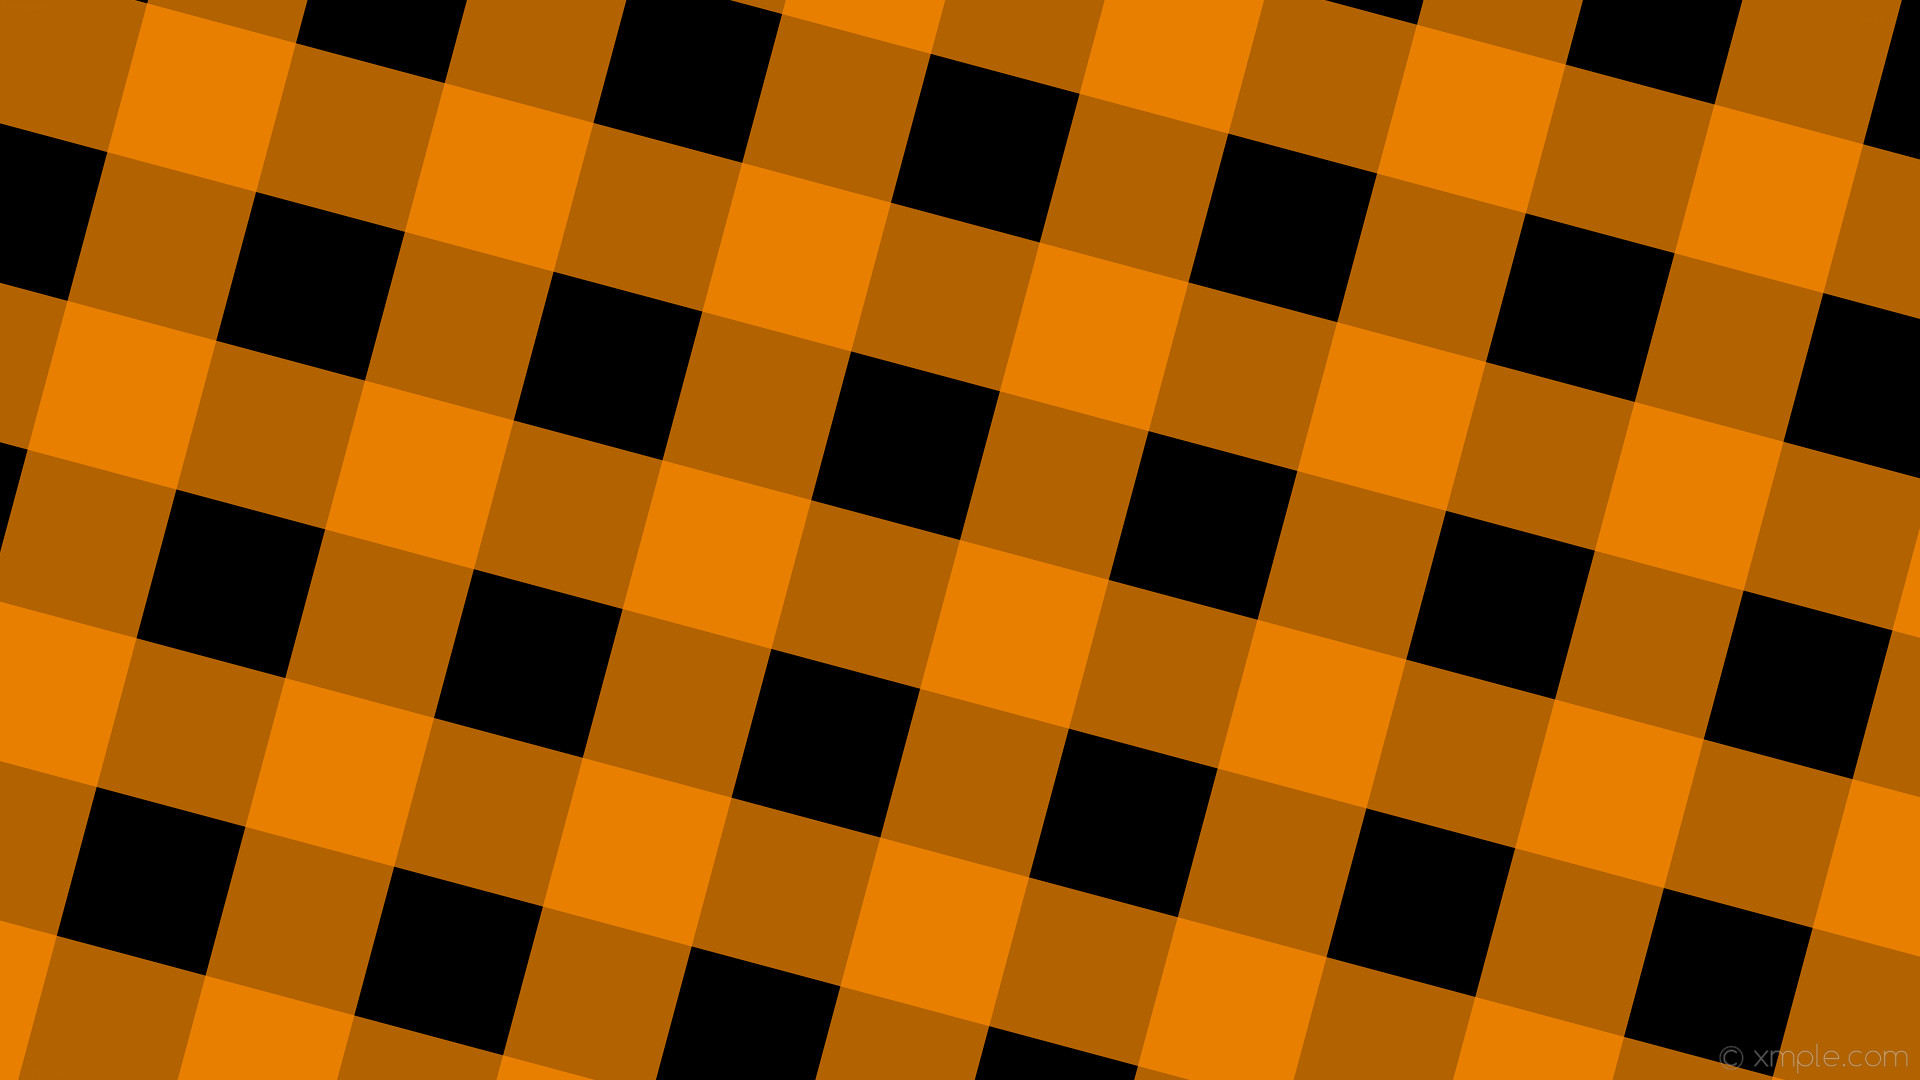 Orange Black Digital Art Shapes Pattern Abstract HD Abstract Wallpapers   HD Wallpapers  ID 71371